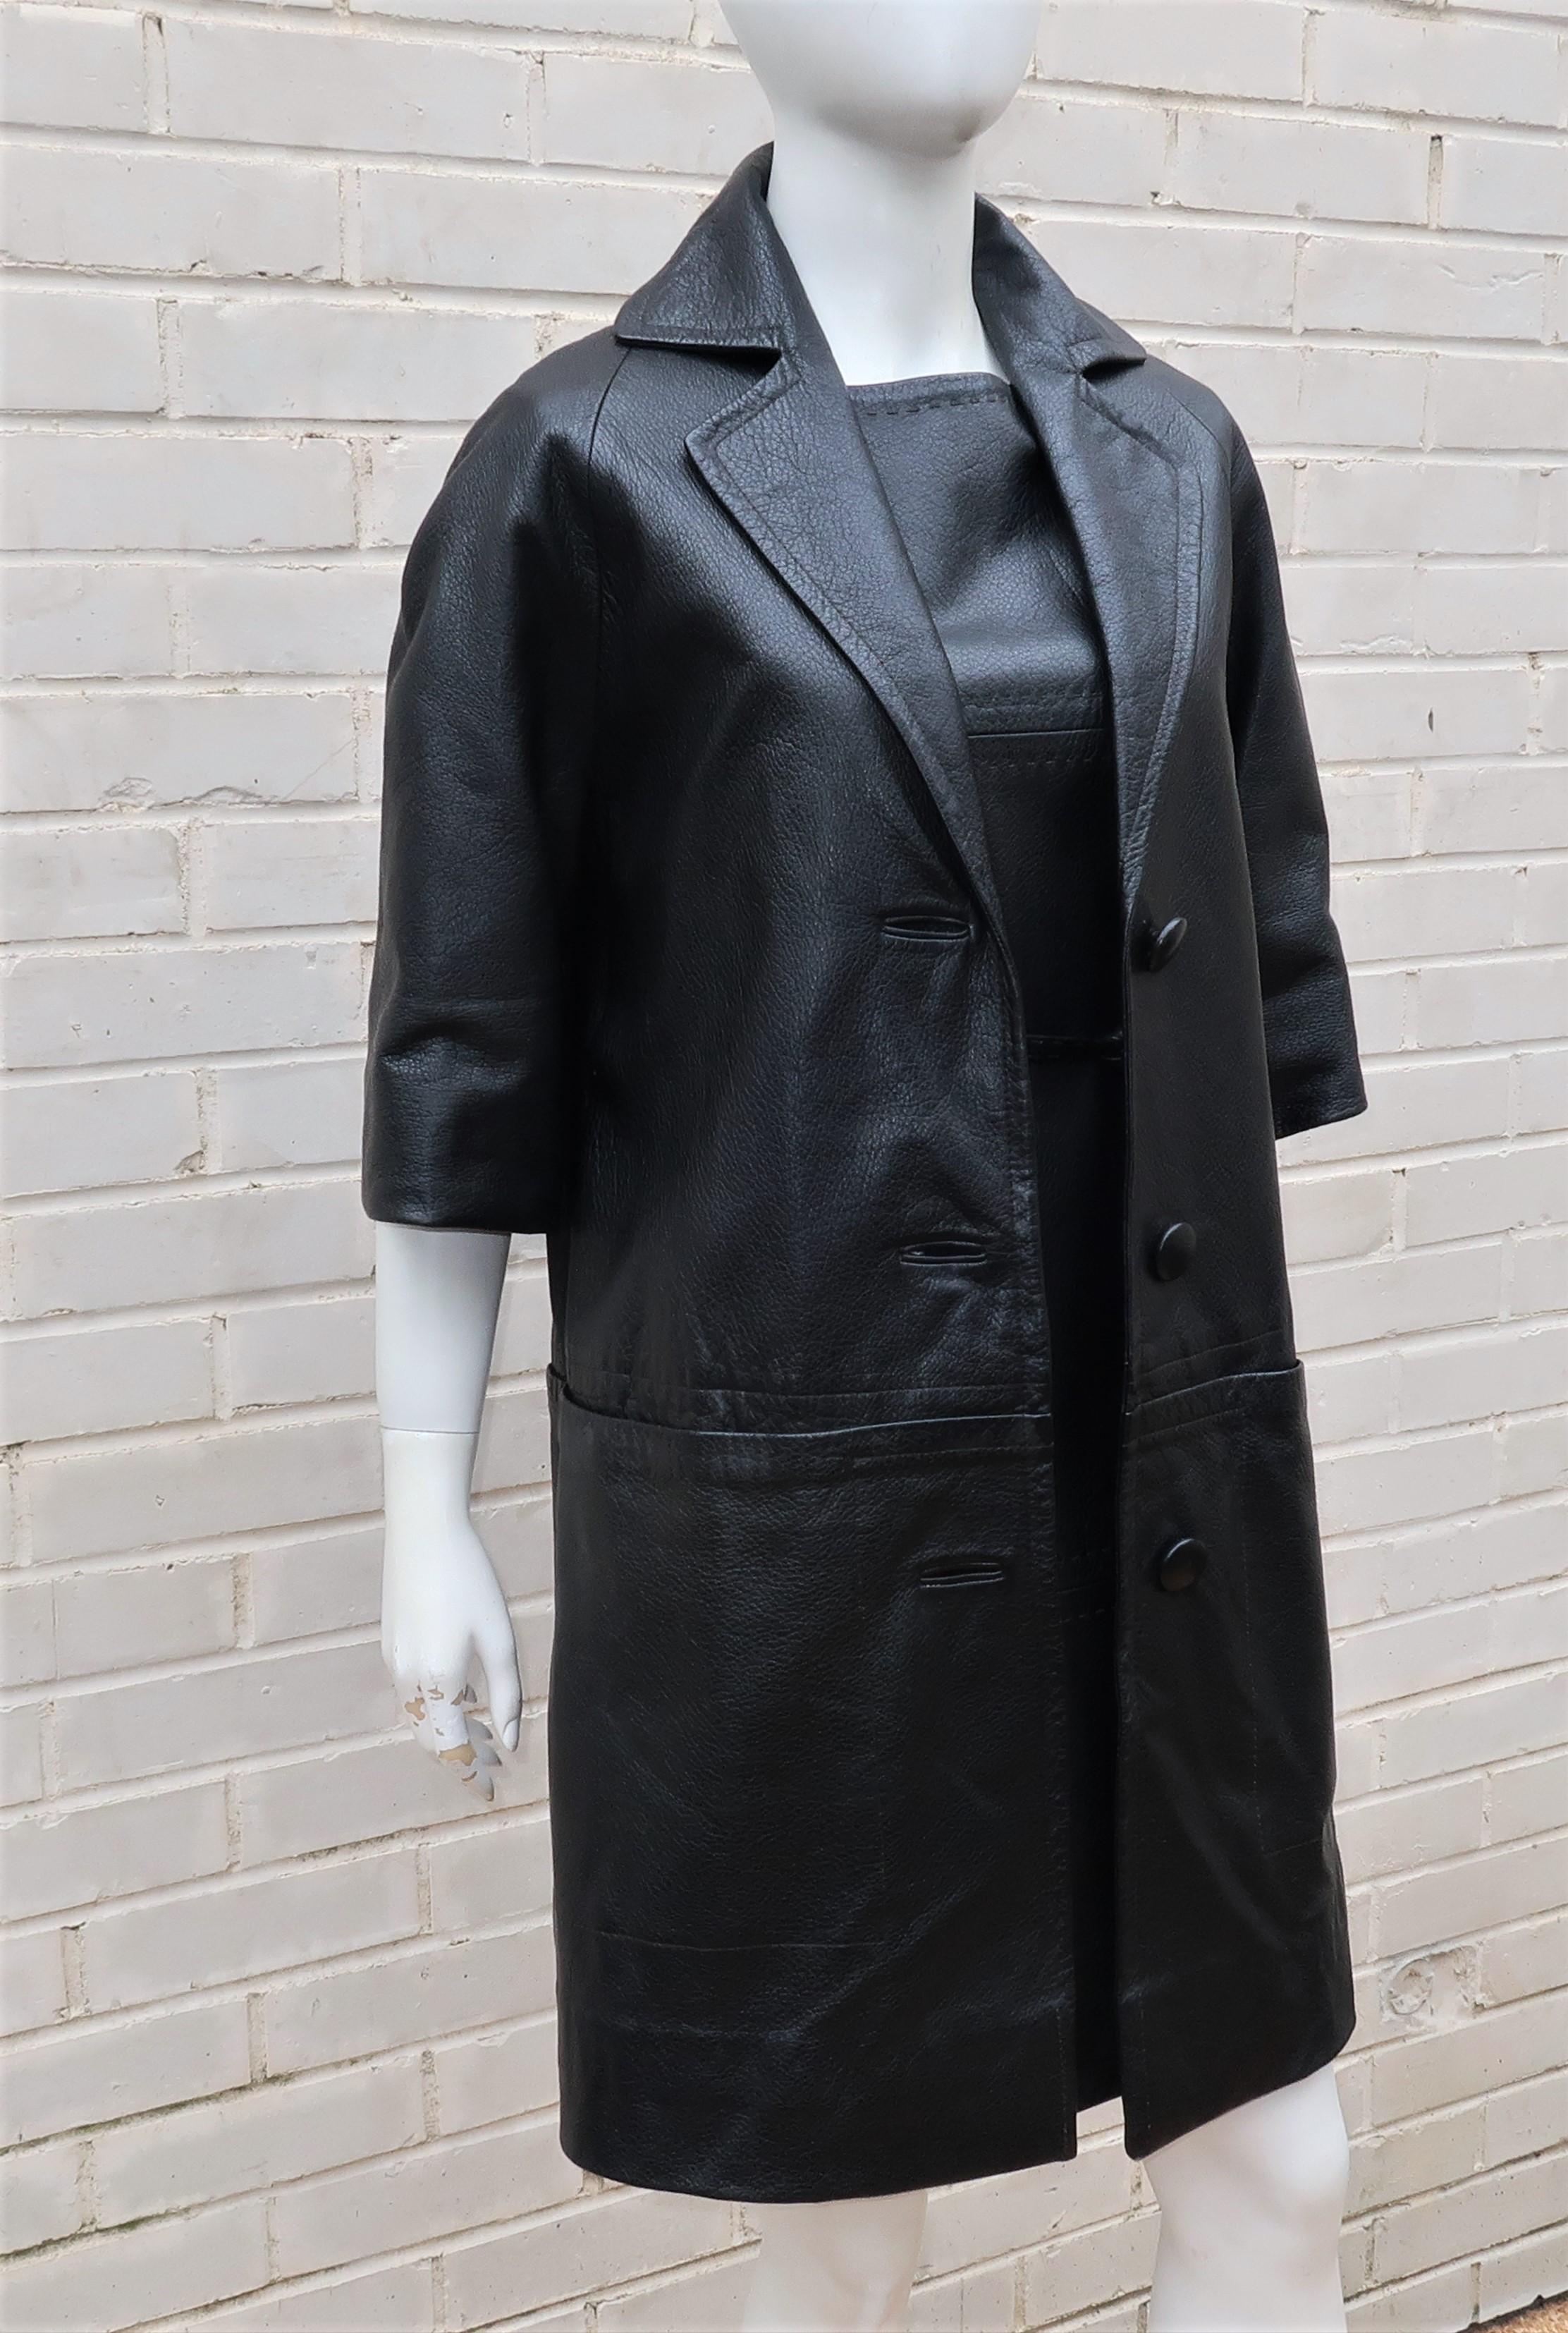 A great mix of mod 1960's style with high quality Mexican leather from Real Sport in a jumper dress and coordinating jacket/coat with 3/4 sleeves.  The jumper dress zips at the side with detailed top stitching.  The jacket with 3/4 modified bell